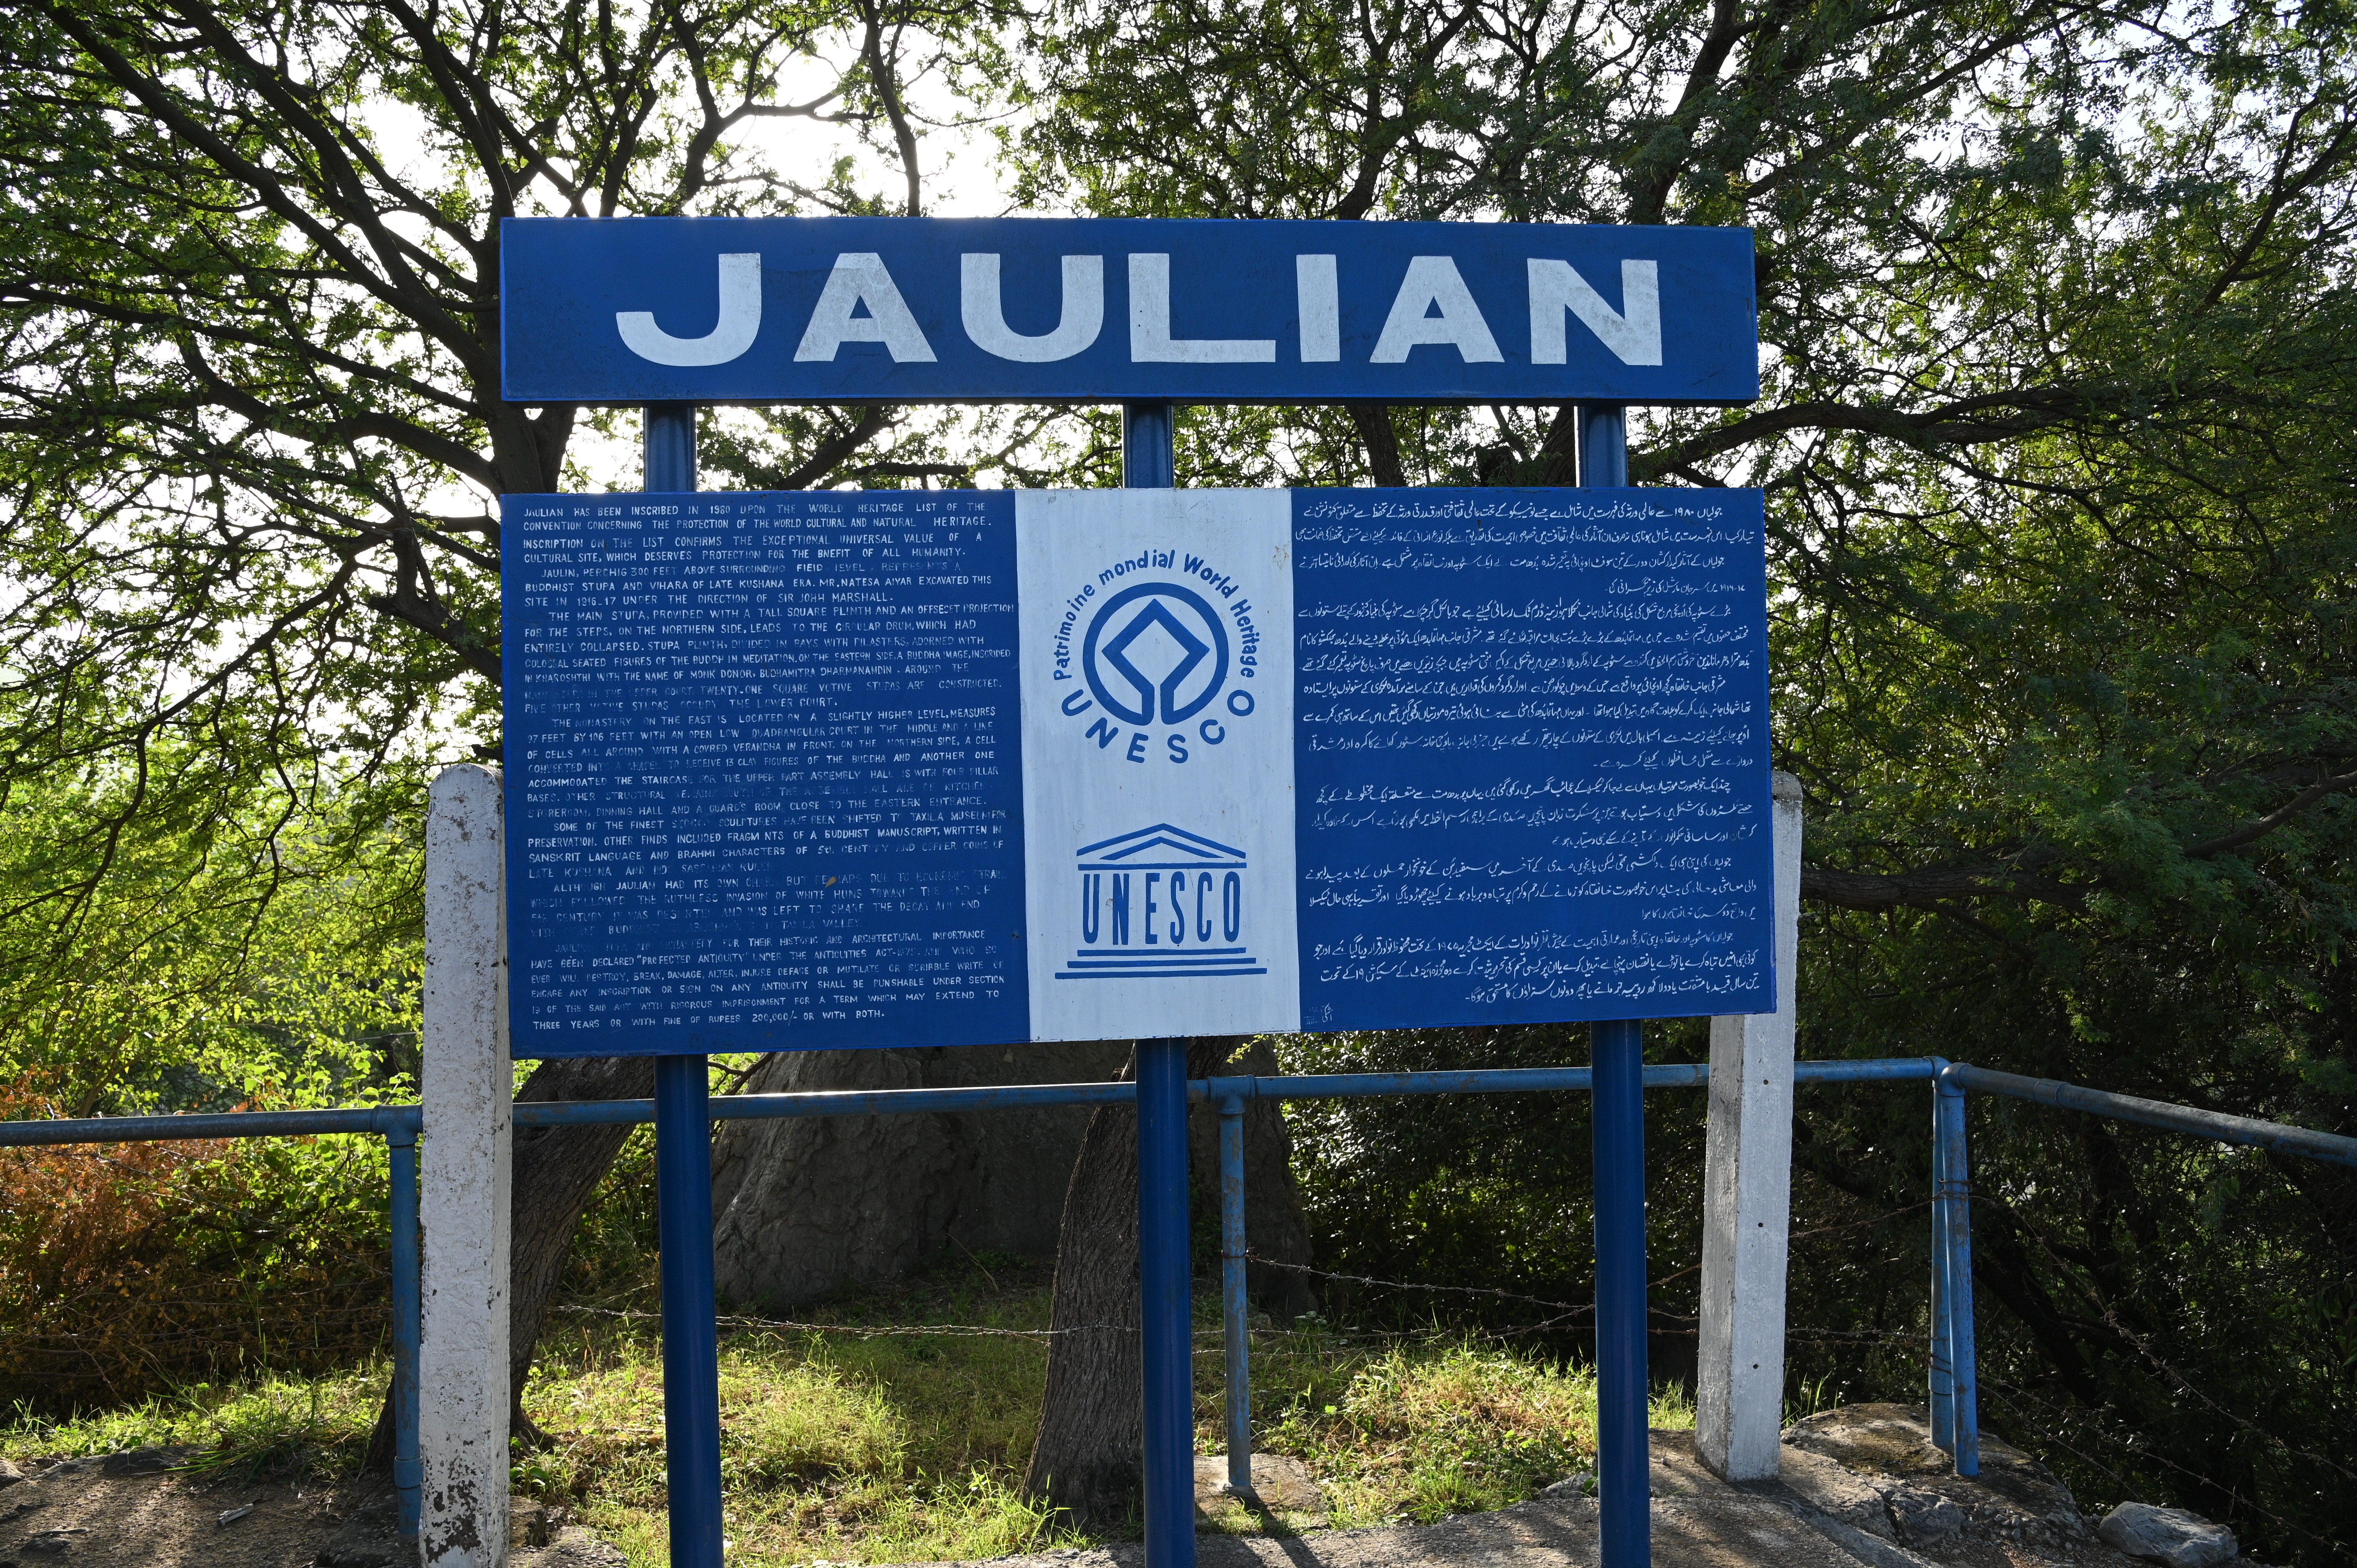 A board showing the history and background of Jaulian